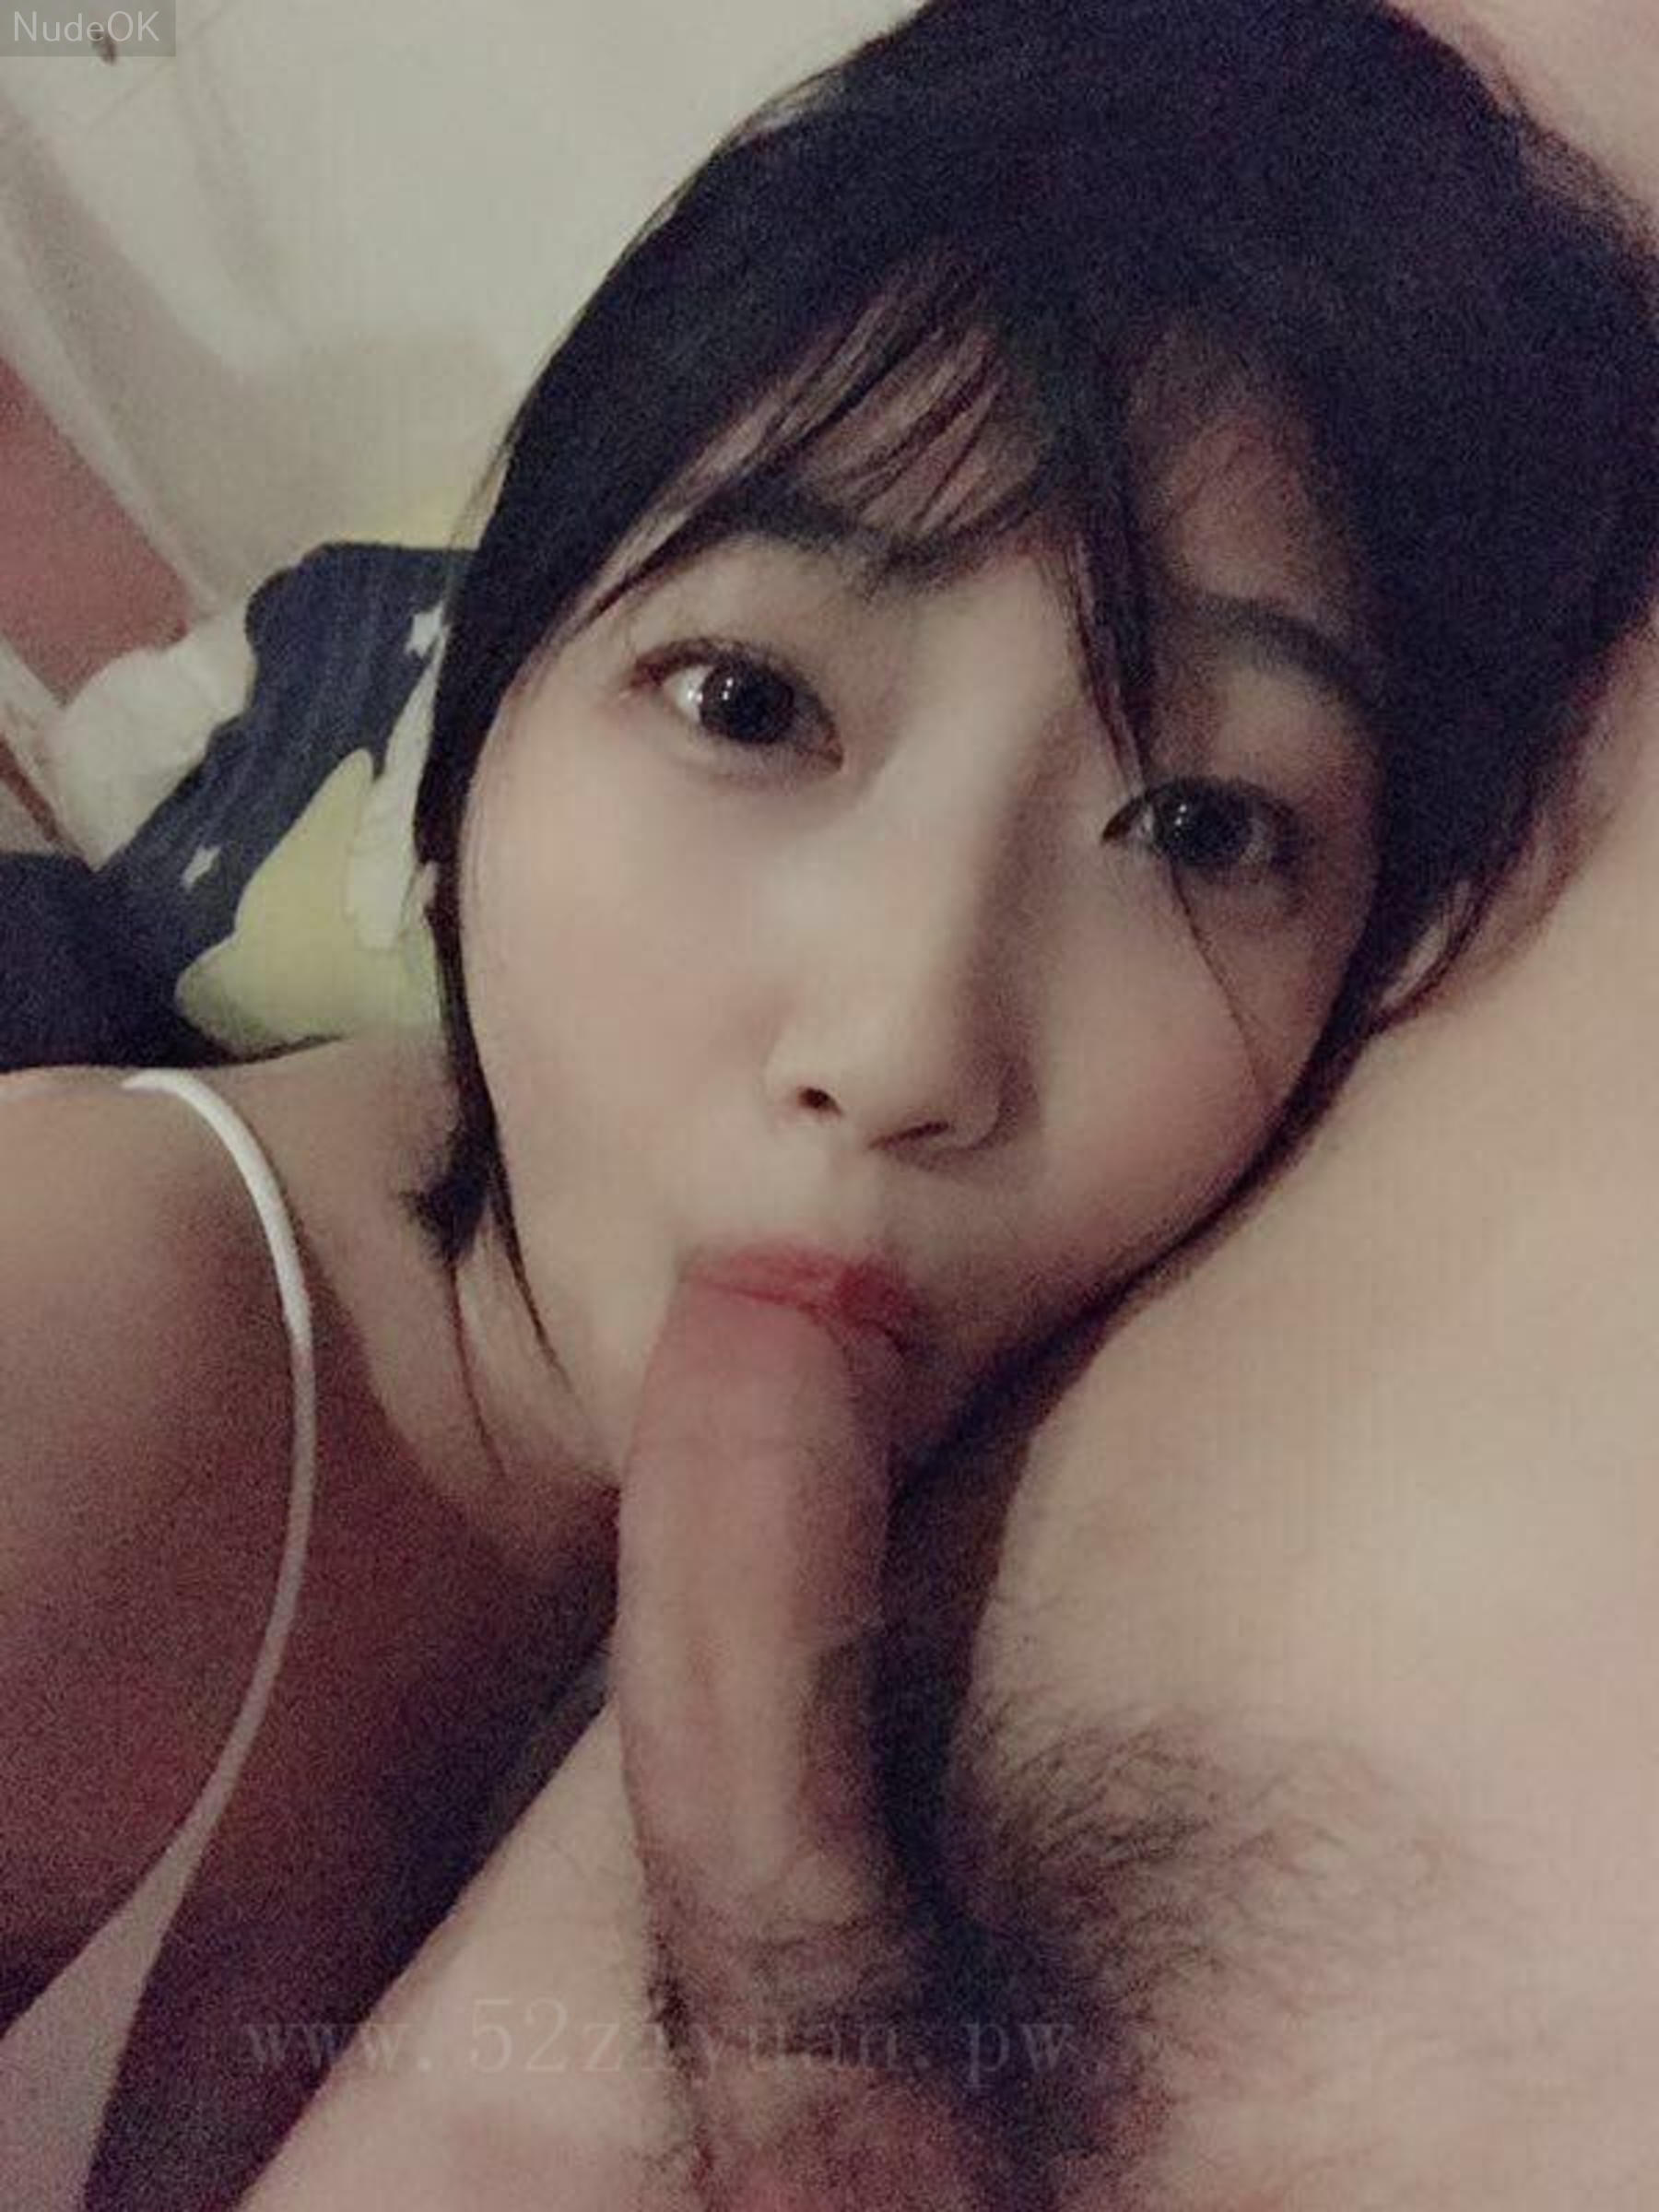 china japan model porn picture nude sexy girl asian viet nam